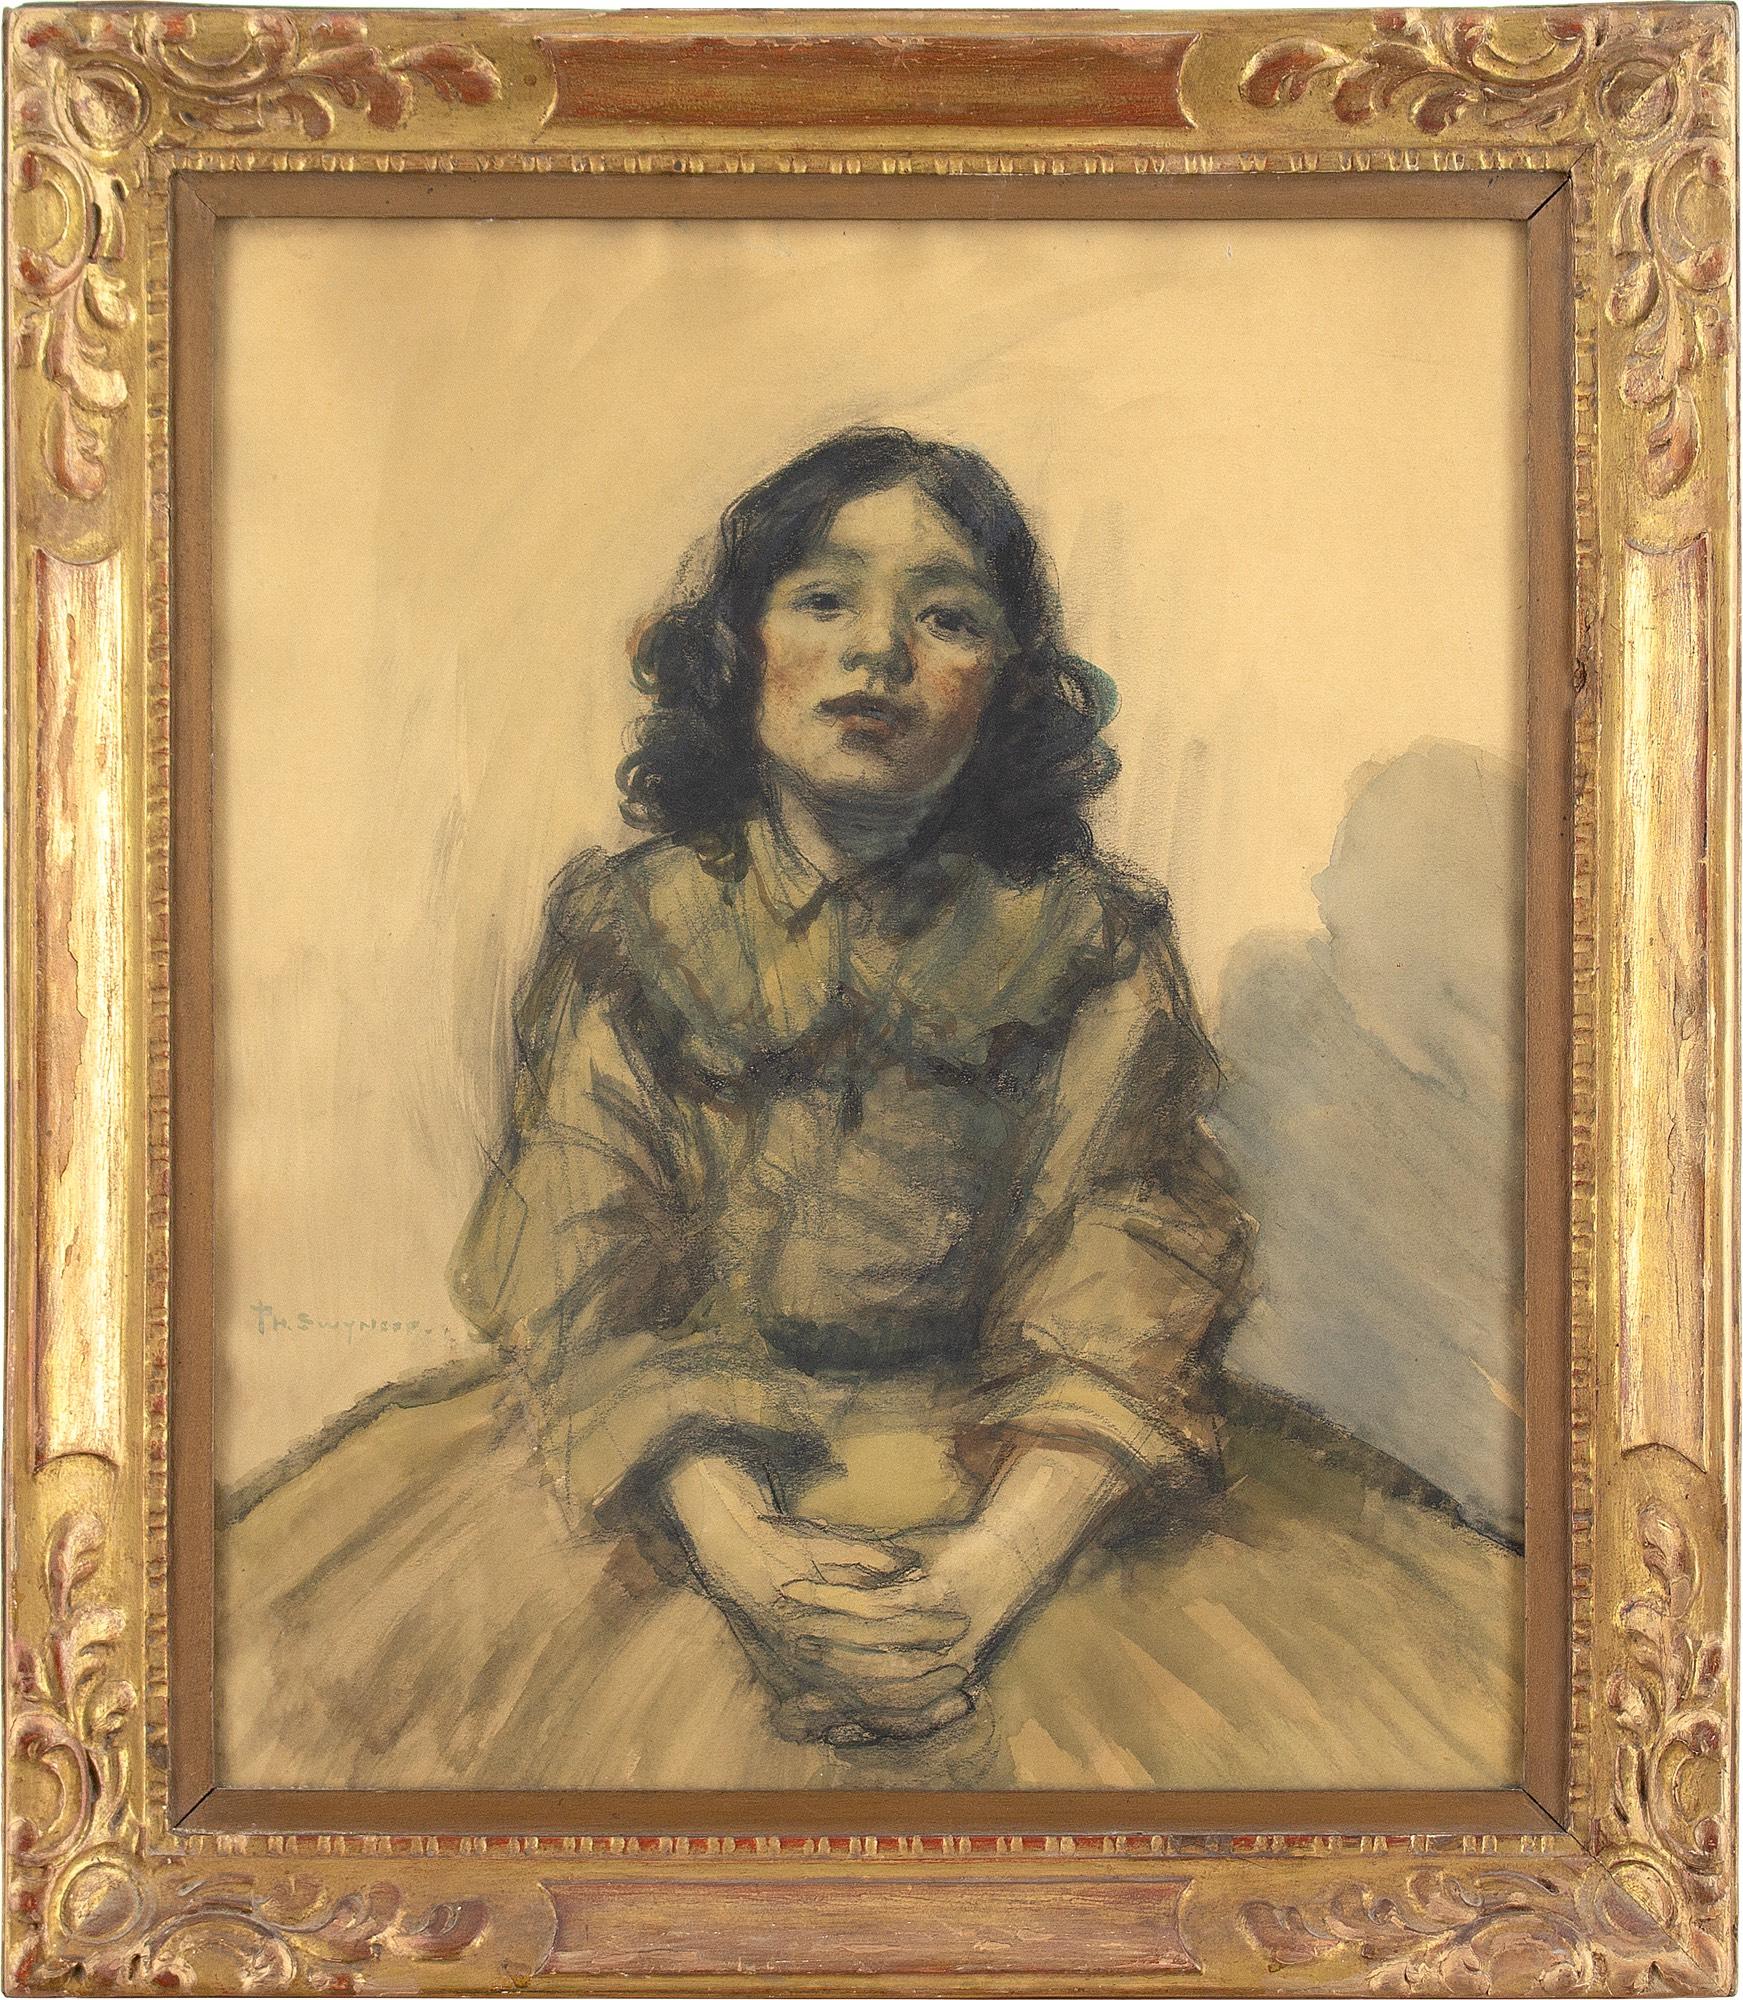 This early 20th-century work by Belgian artist Philippe Swyncop (1878-1949) depicts a seated young lady with a confident expression. It’s a characterful portrayal by a notable artist with a lively demeanour.

Swyncop was an artist’s artist. Born in